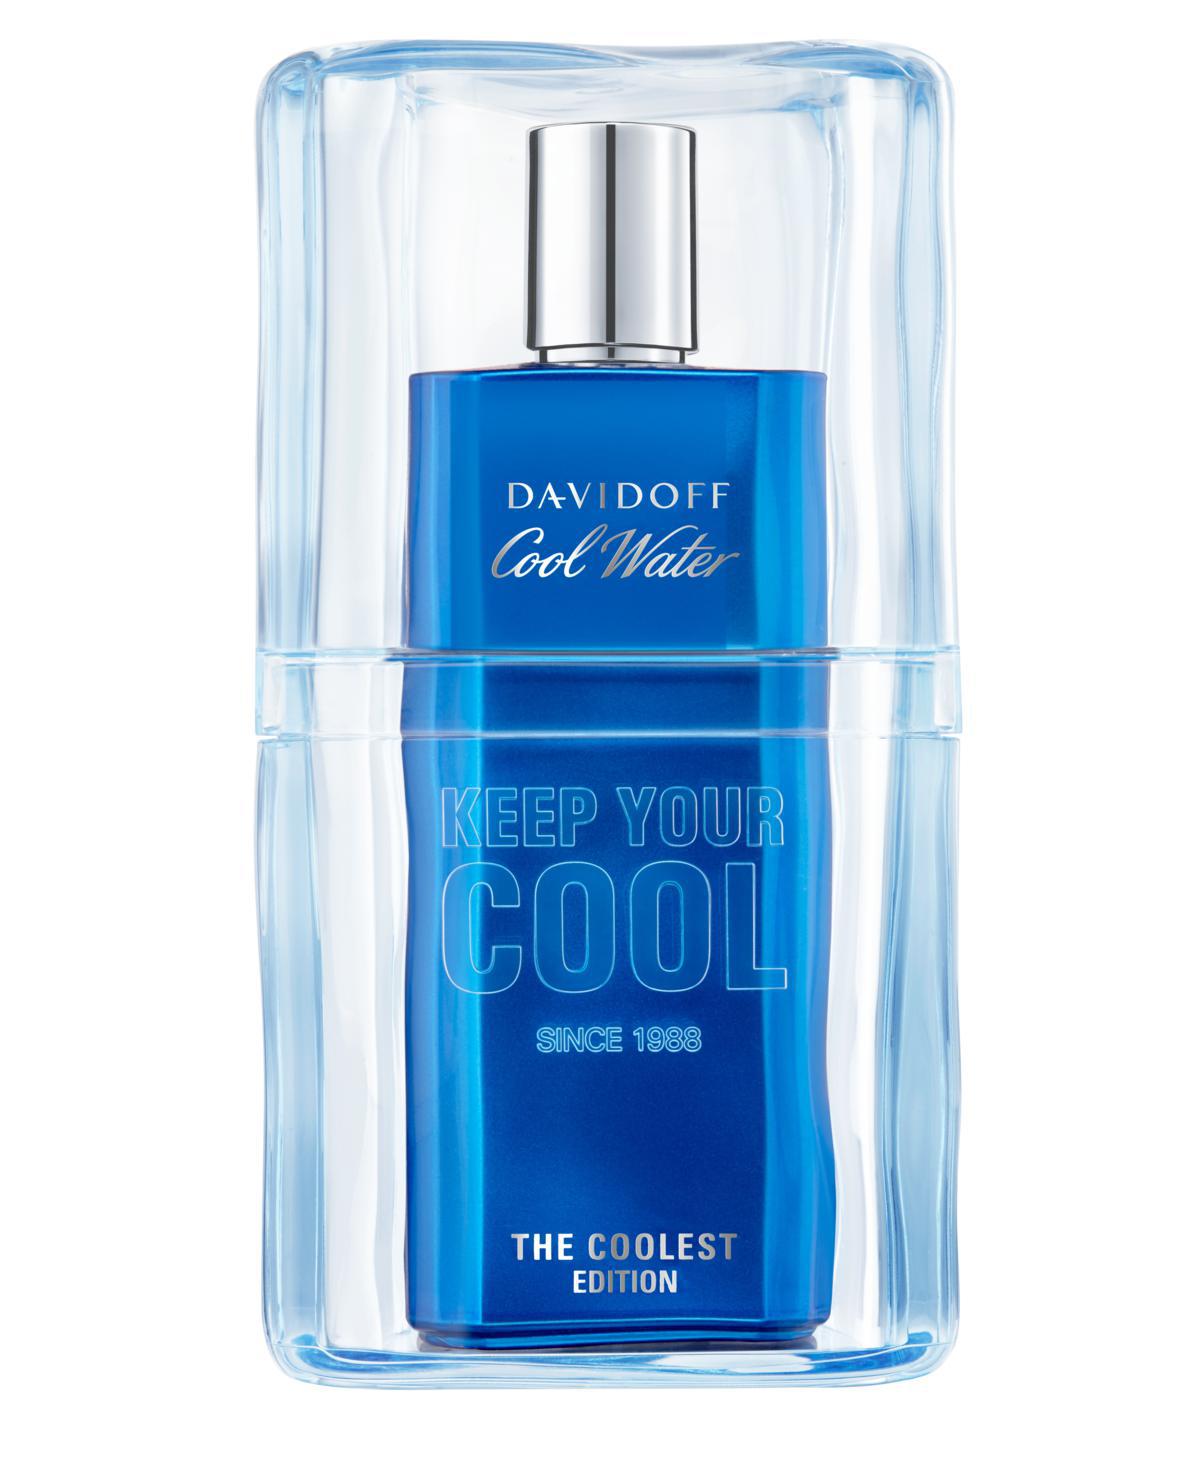 Davidoff Cool Water - The Coolest Edition